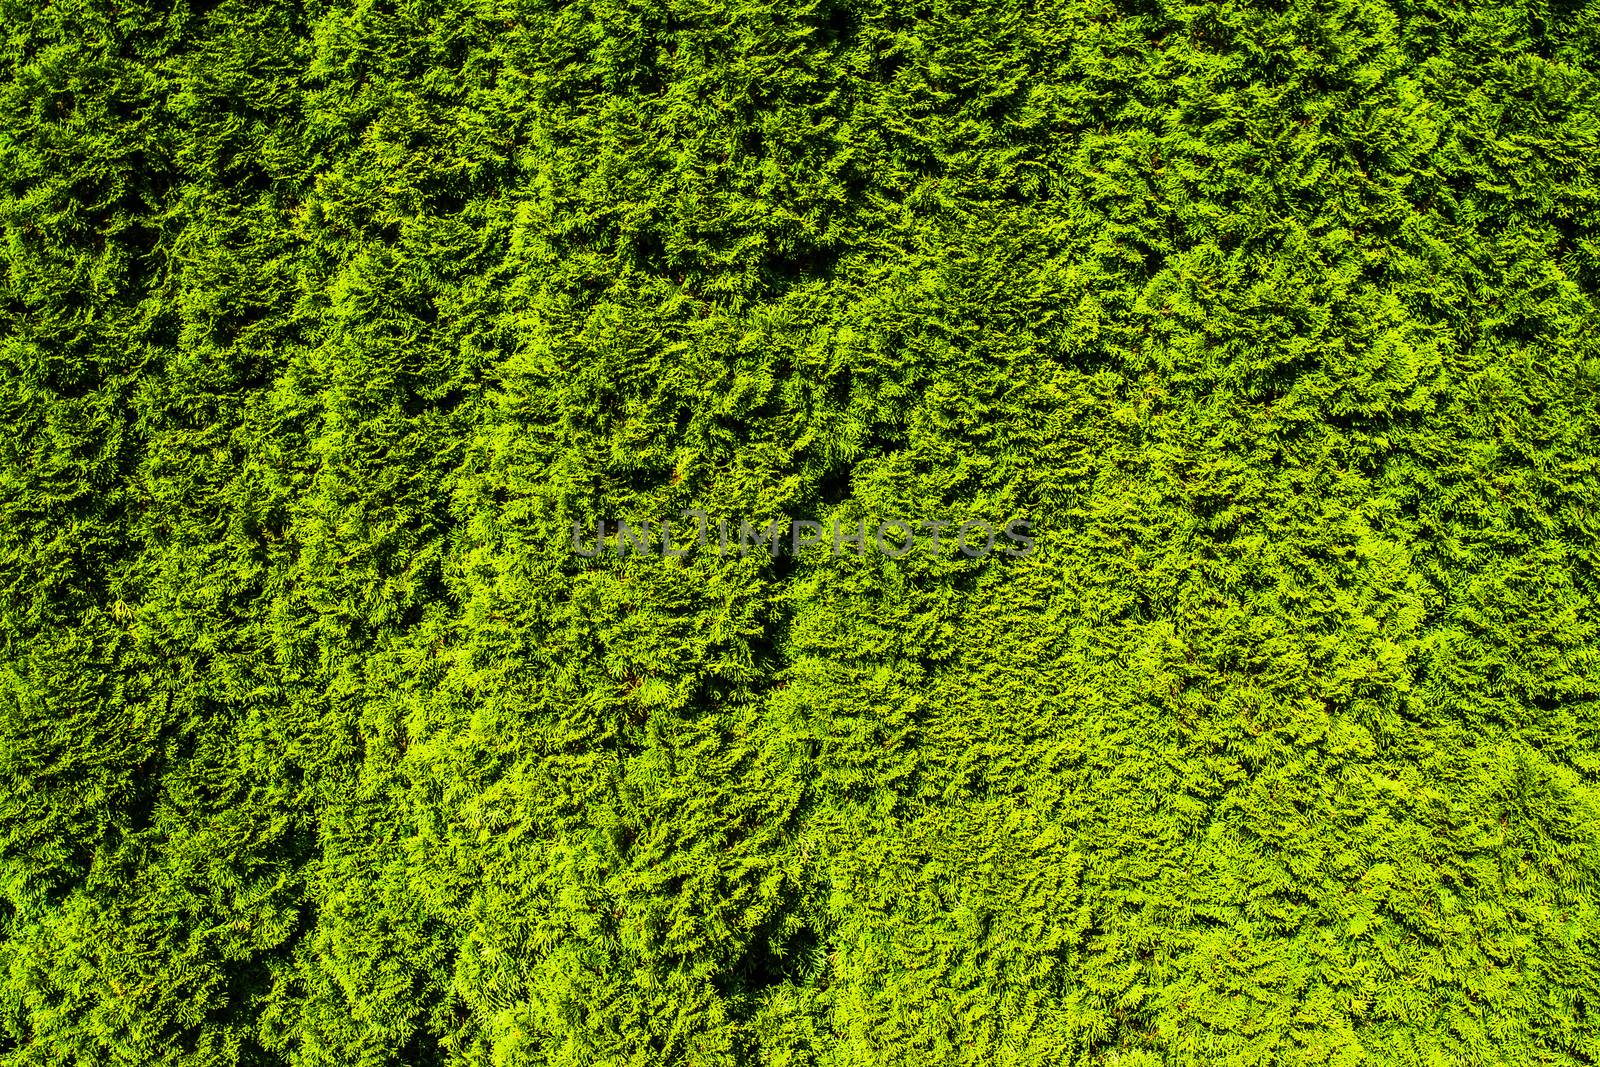 Natural Green Leaf Wall Texture for Backdrop. Vertical Fence Des by Tartezy